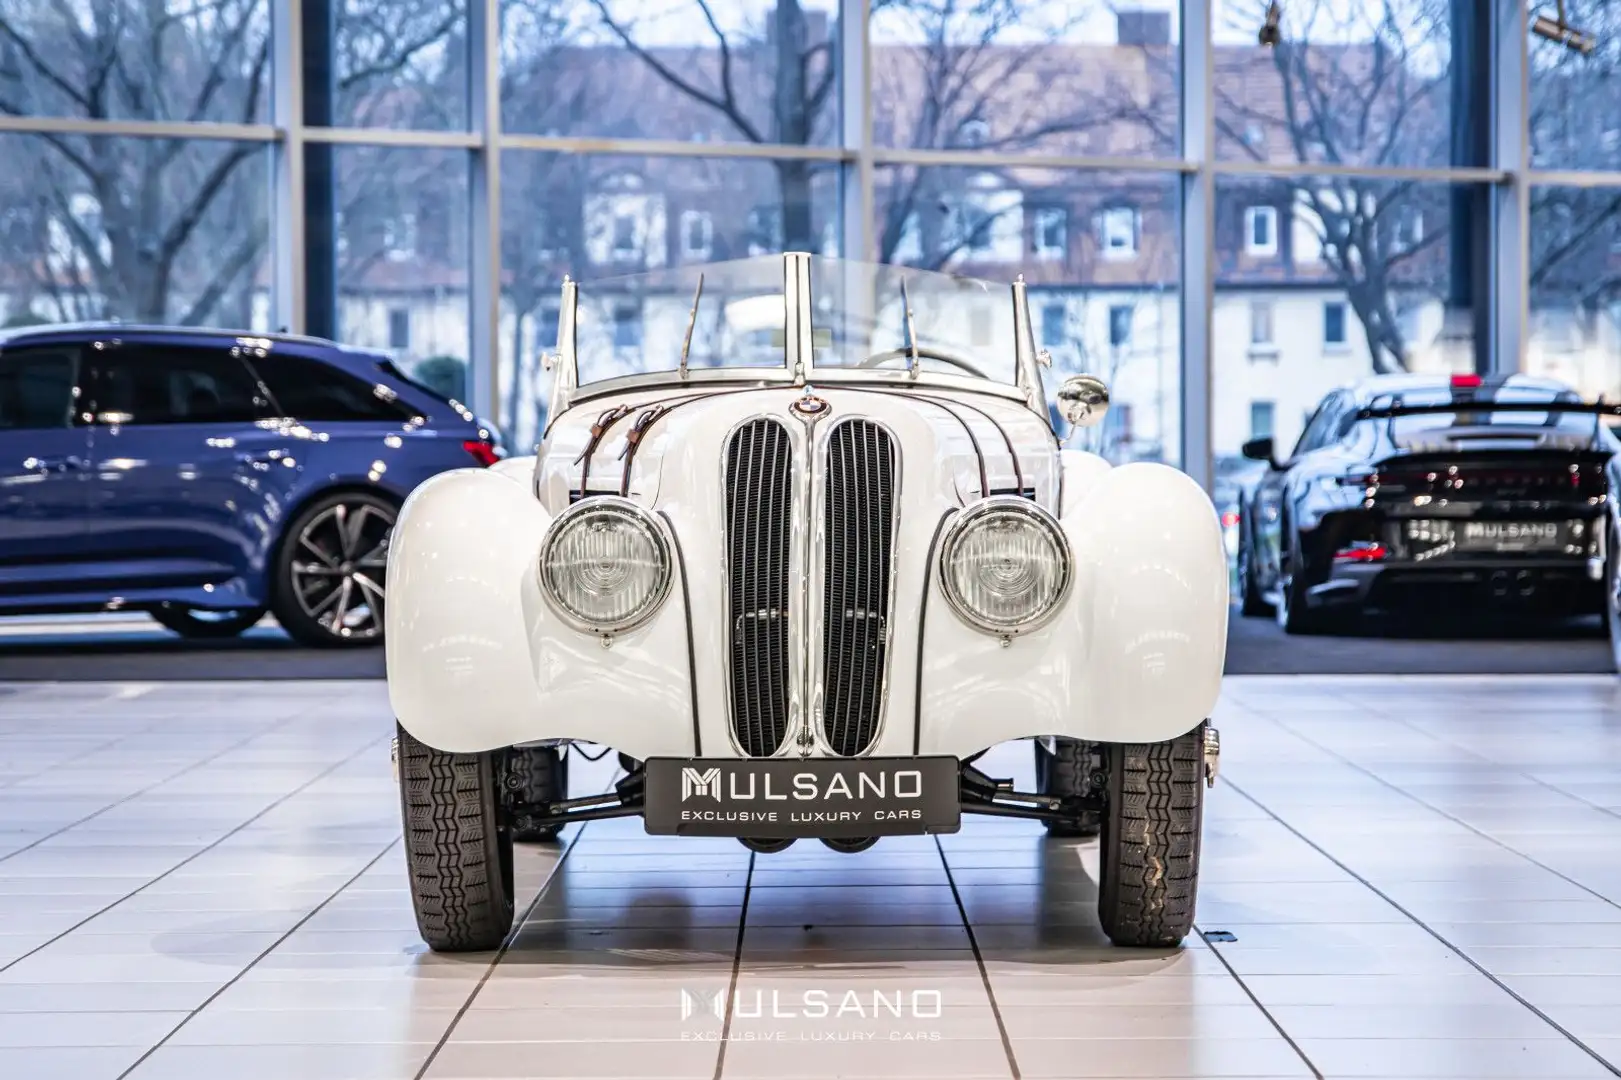 BMW 328 Roadster Special Recreation White - 2